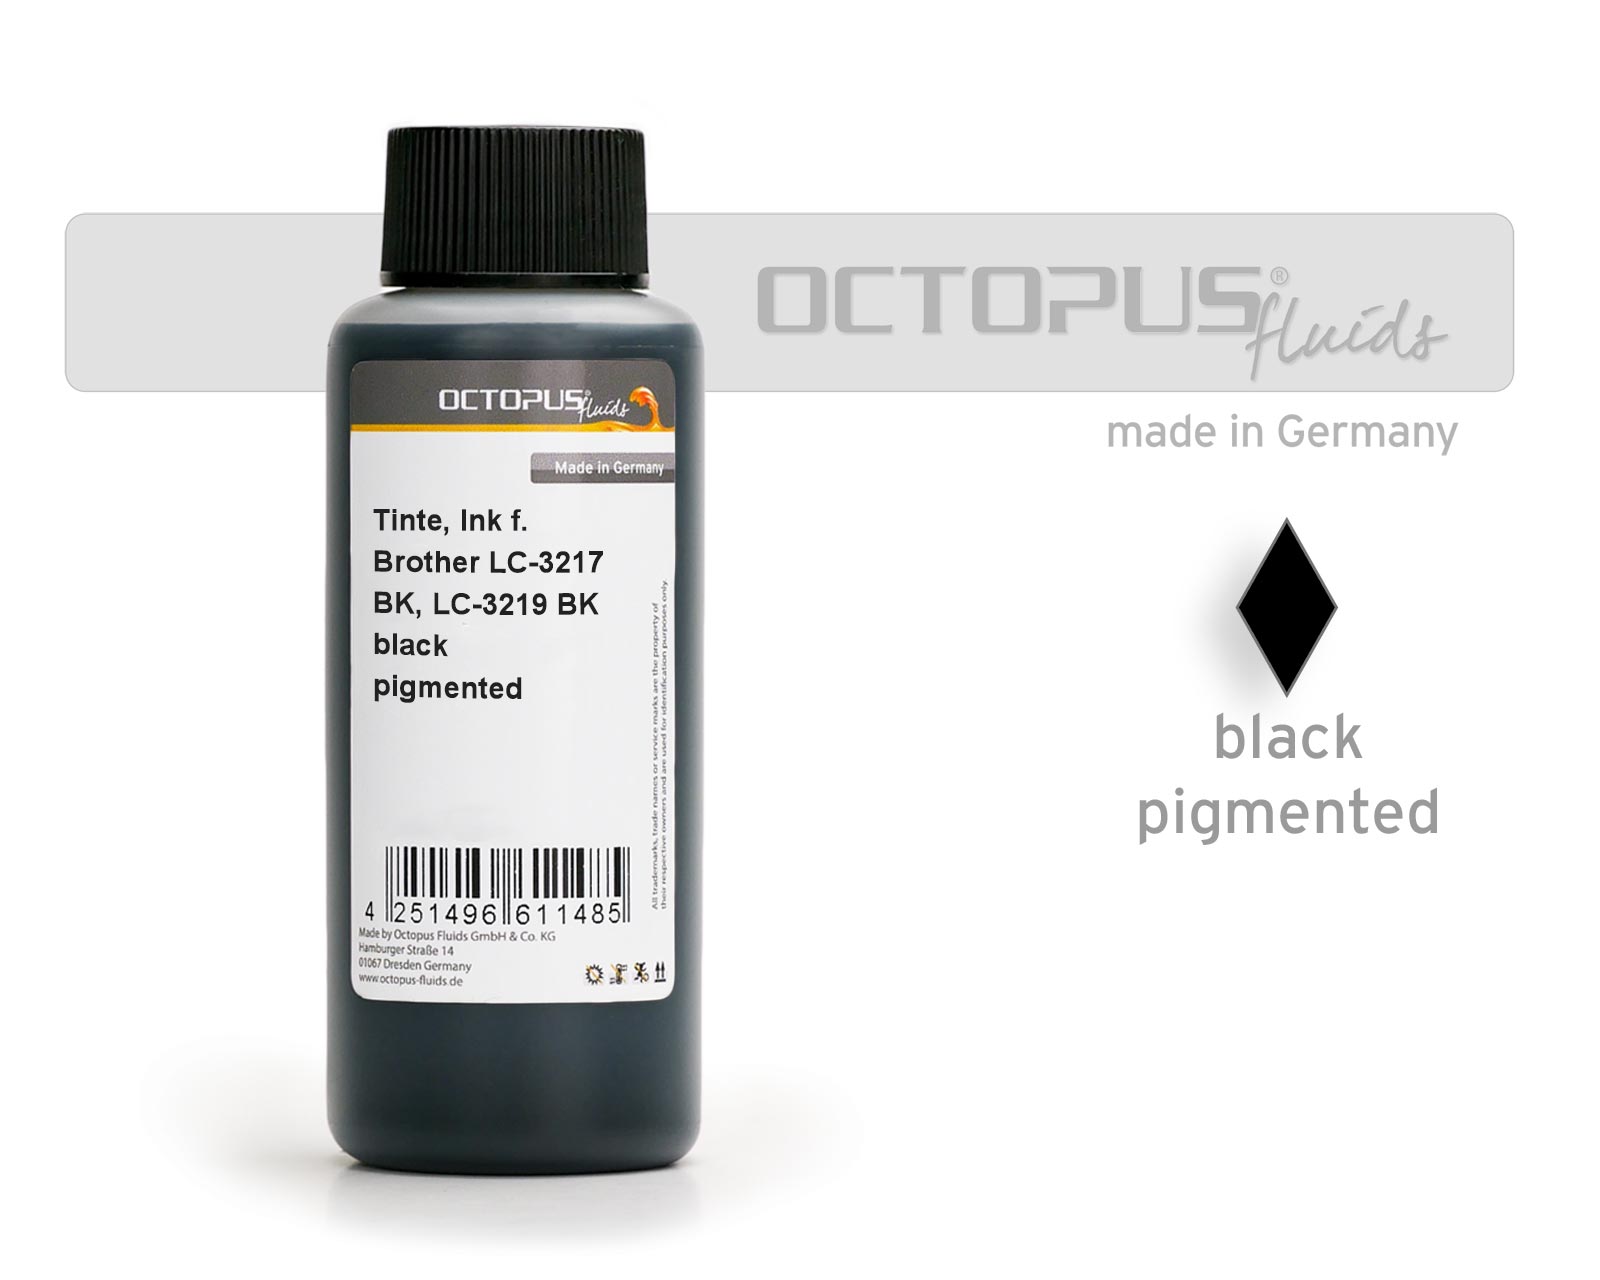 Refill ink comp. with Brother LC-3217 BK, LC-3219 BK black pigmented